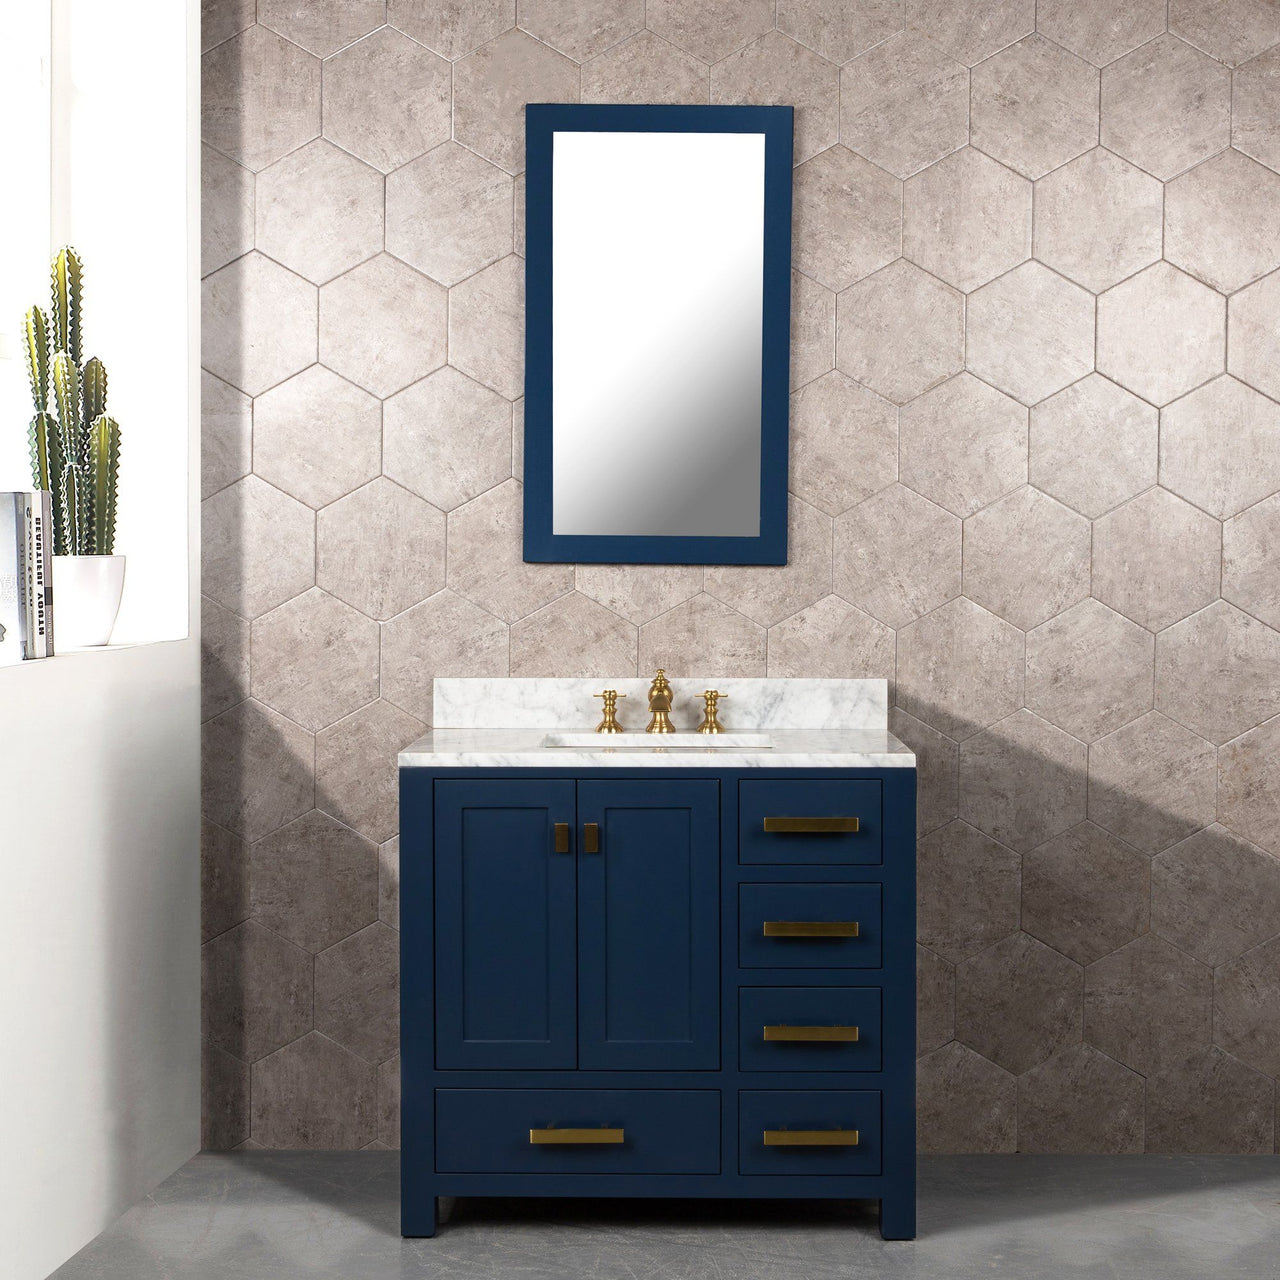 Madison 36-Inch Single Sink Carrara White Marble Vanity In Monarch Blue With Matching Mirror and F2-0013-06-FX Lavatory Faucet Vanity Water Creation 